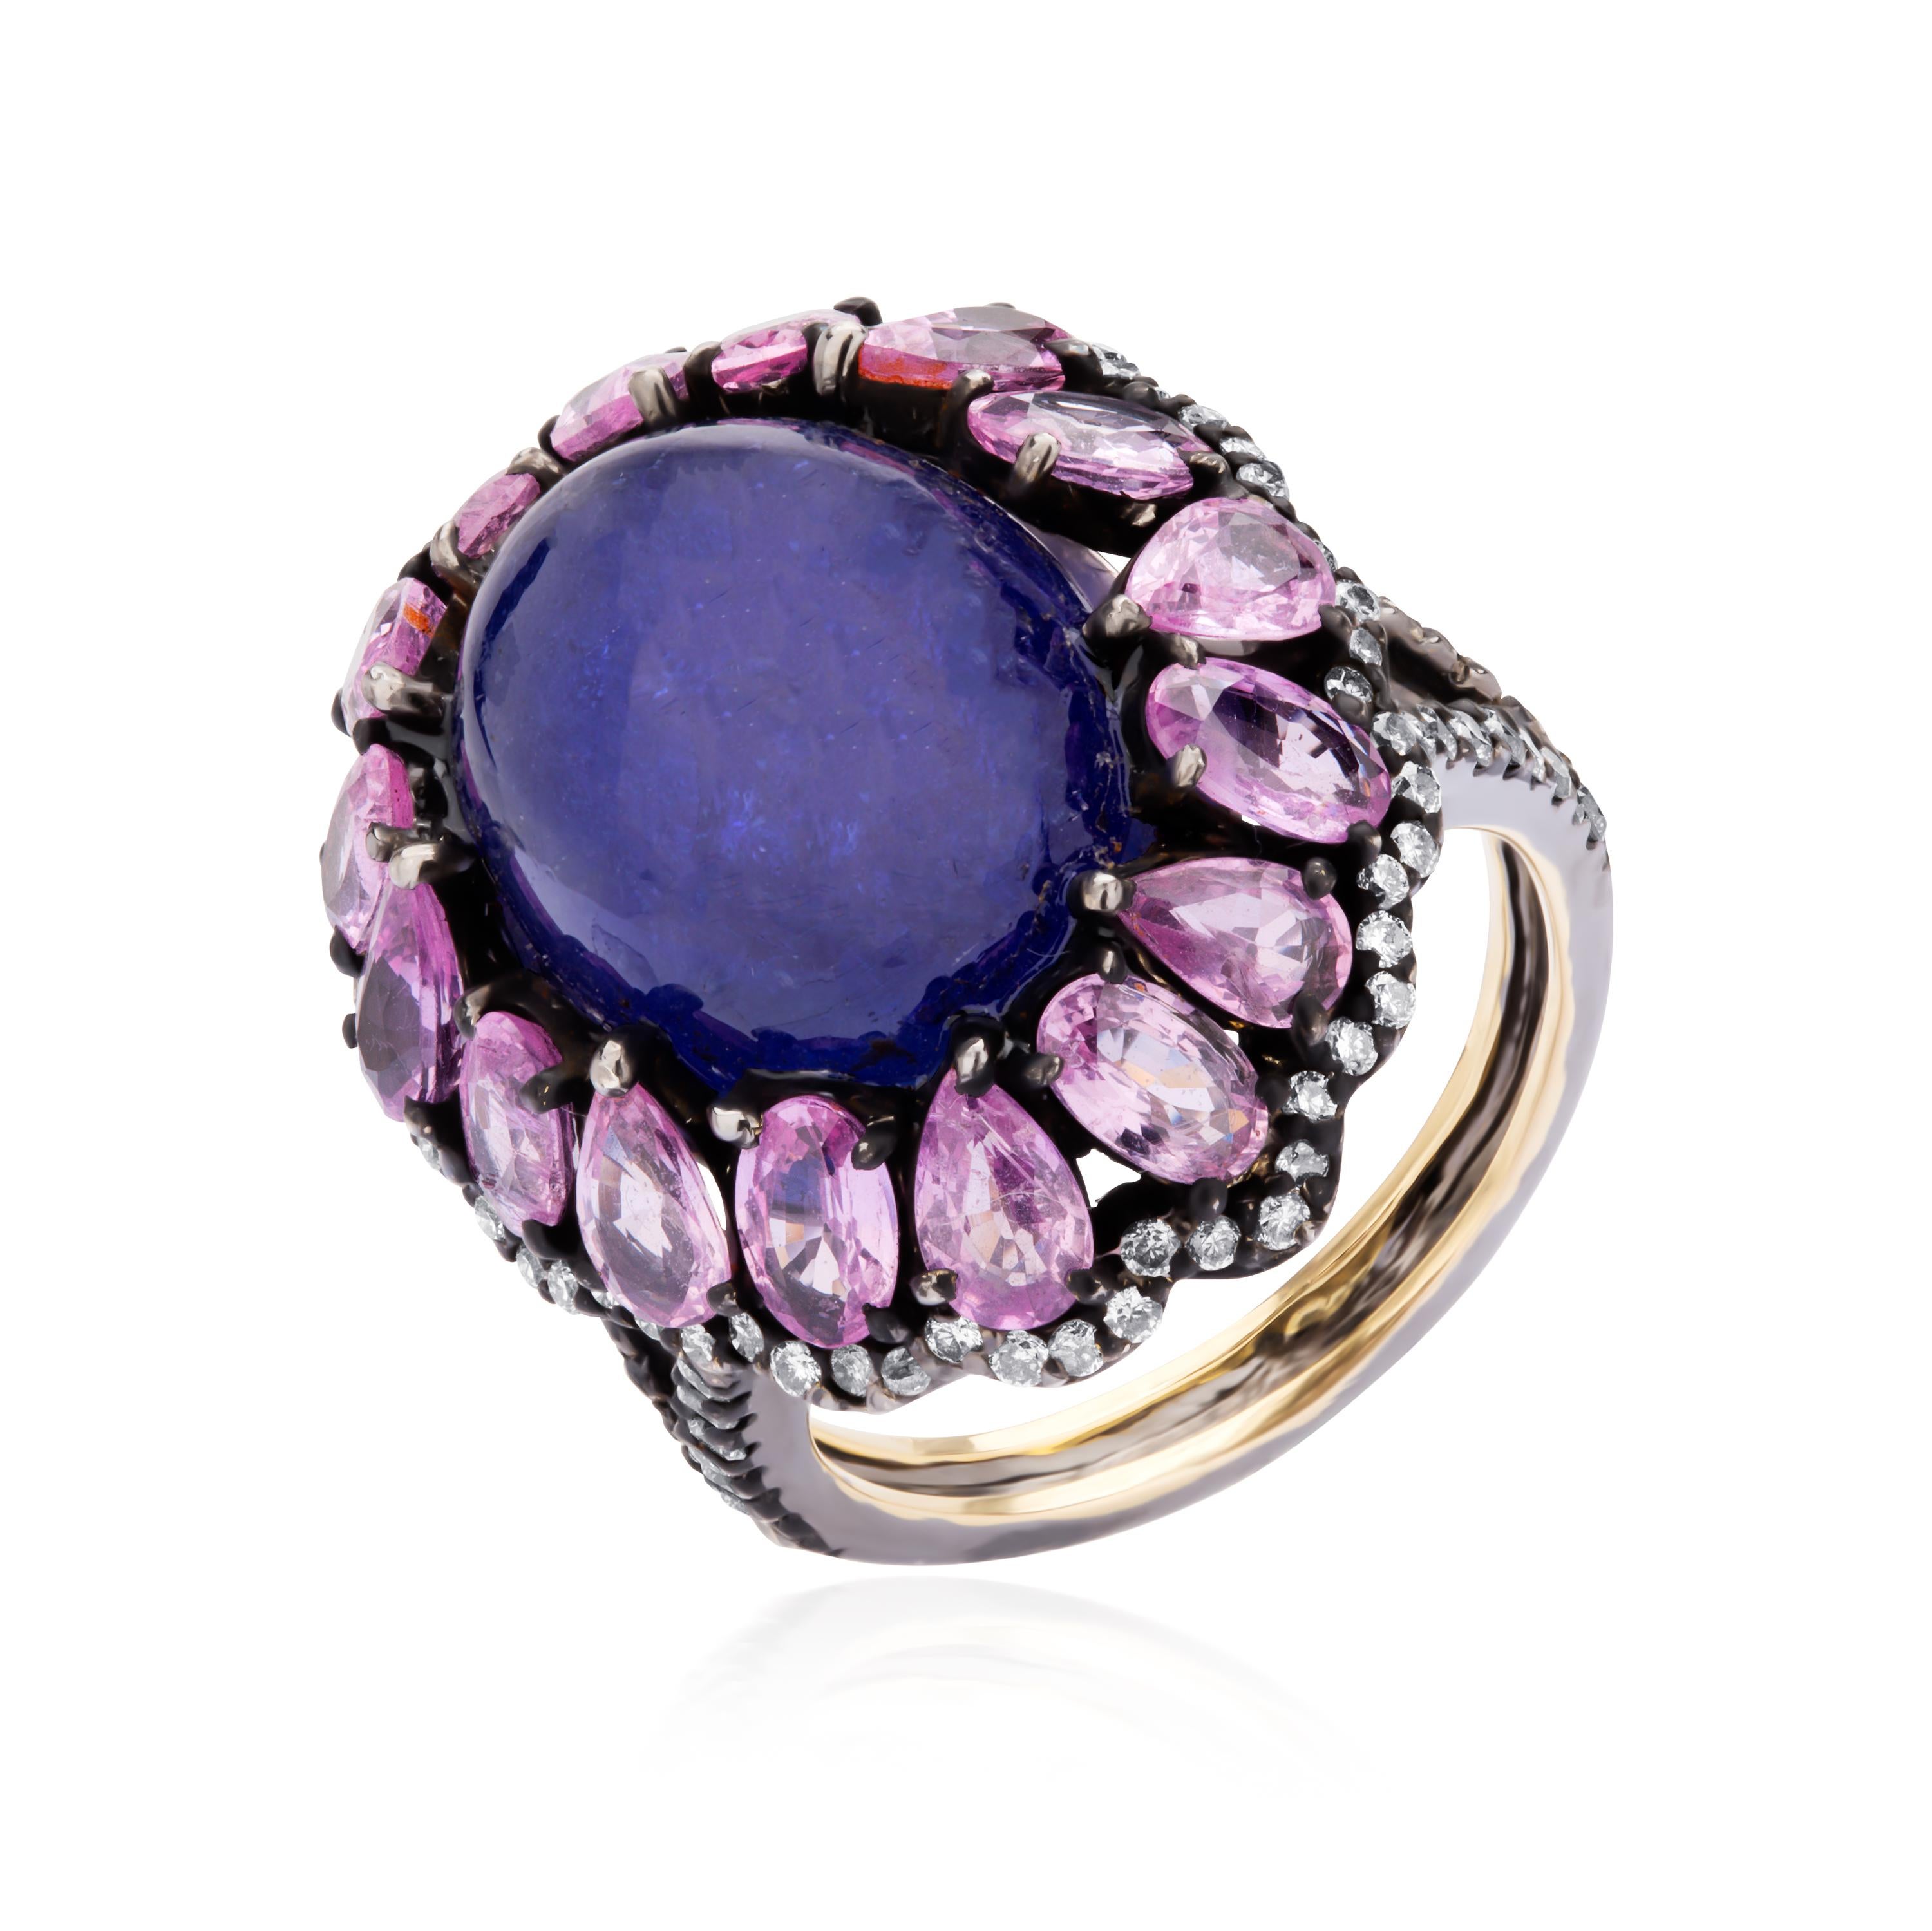 Vividly colorful, this gorgeous Victorian ring gleams with a stupendous 12*15 mm cabochon of 14. 5 carat Tanzanite sitting amidst a sparkling pool of faceted oval and pear cut pink sapphires alternating with each other. The center design is